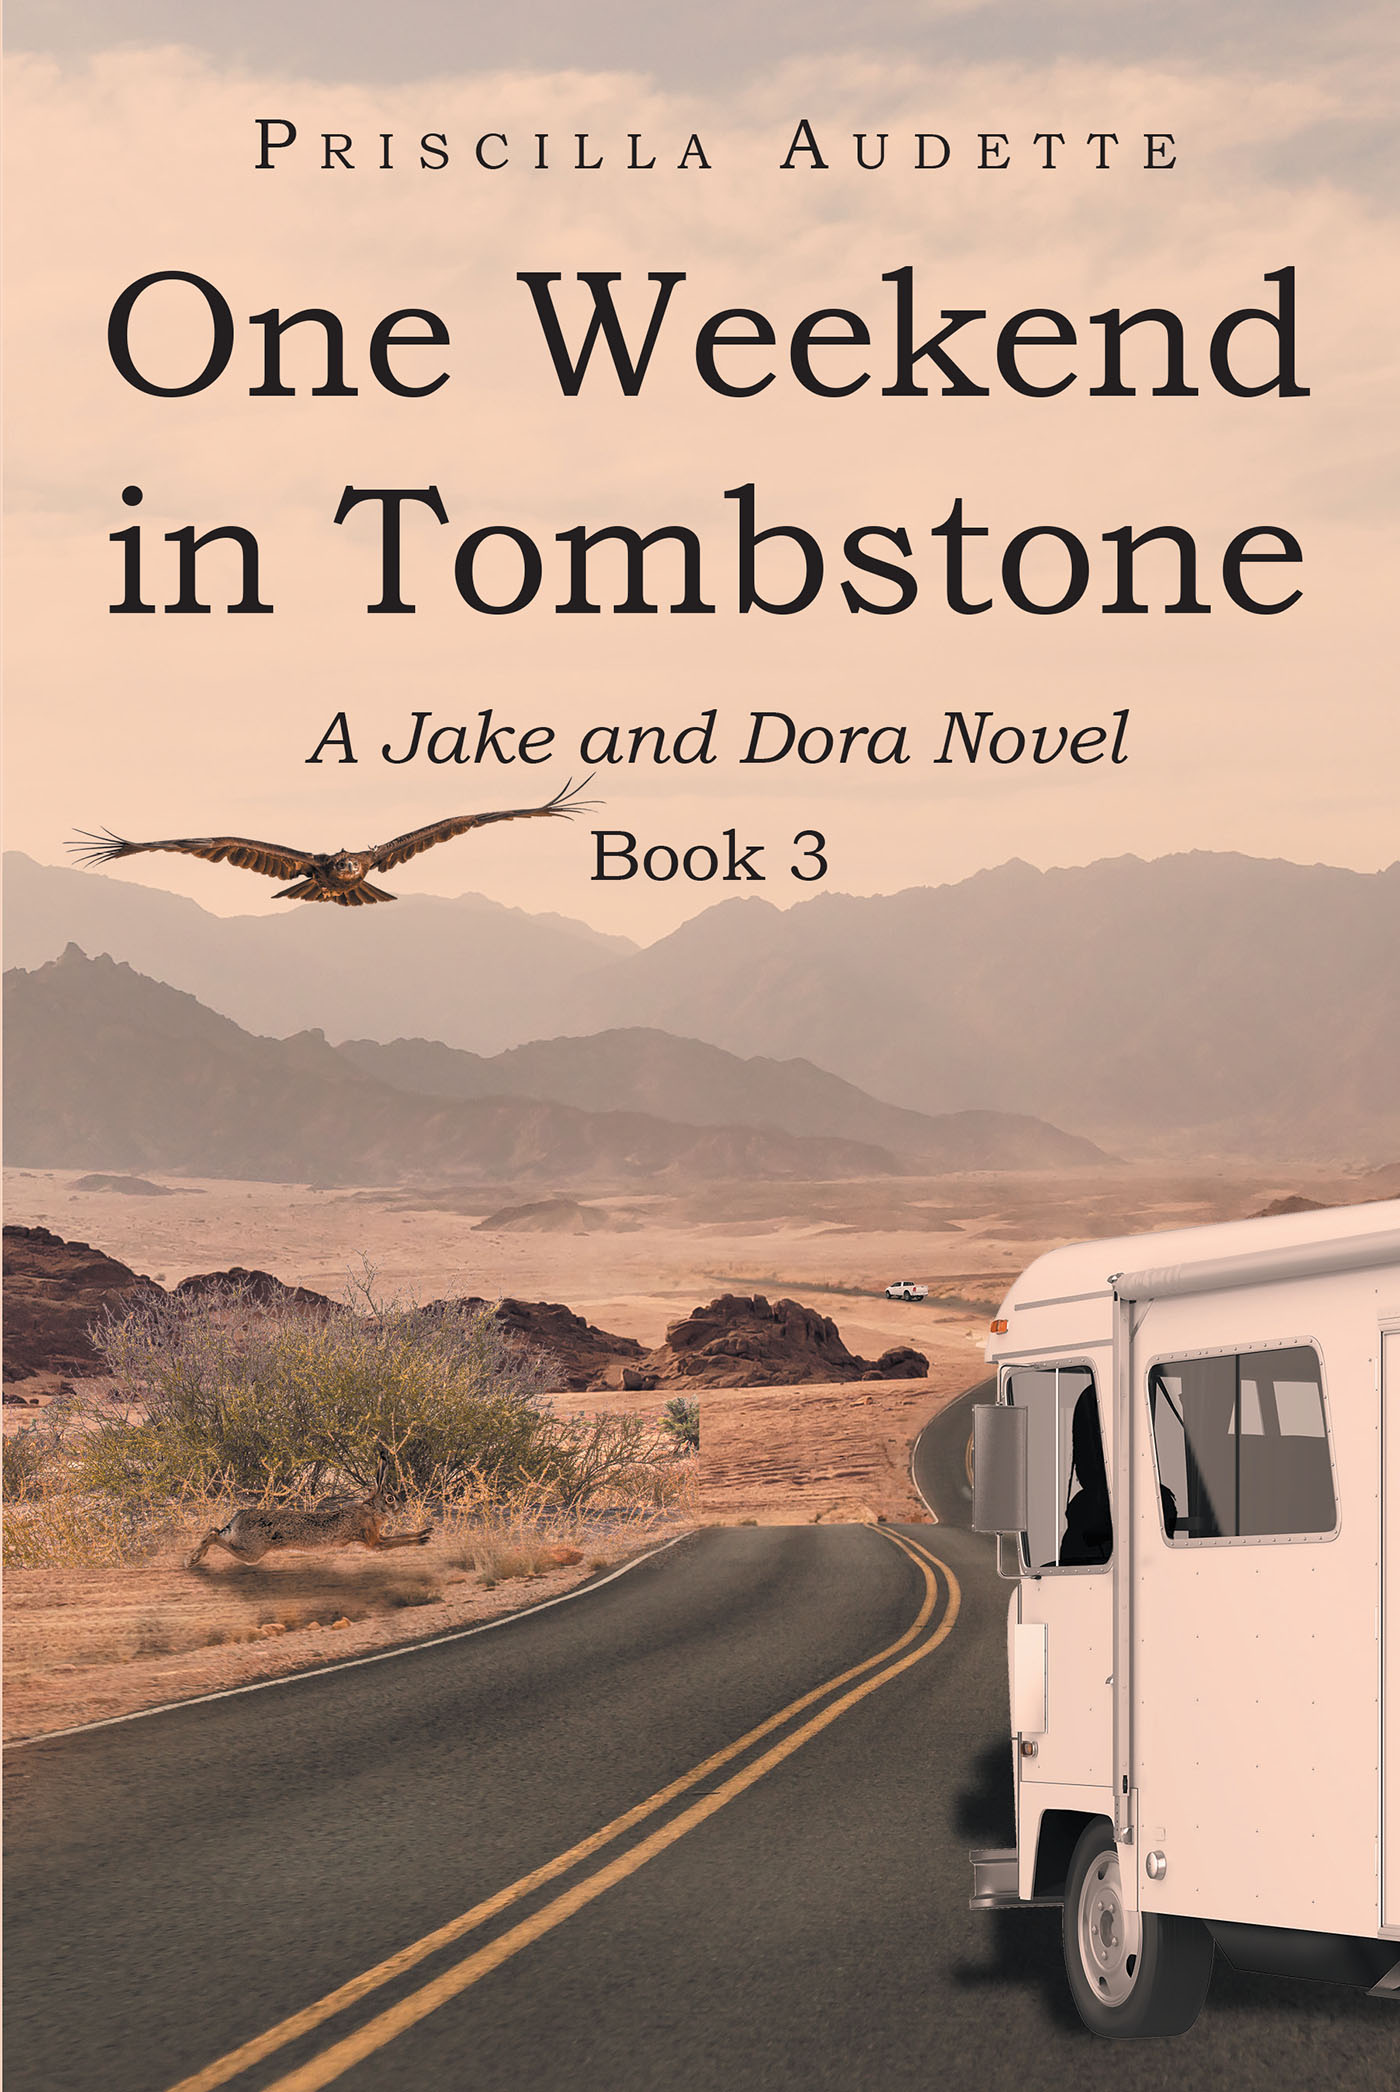 Author Priscilla Audette’s New Book, “One Weekend in Tombstone: A Jake and Dora Novel,” Follows One Woman’s Quest to Find Her Soul Mate After He Seemingly Vanishes